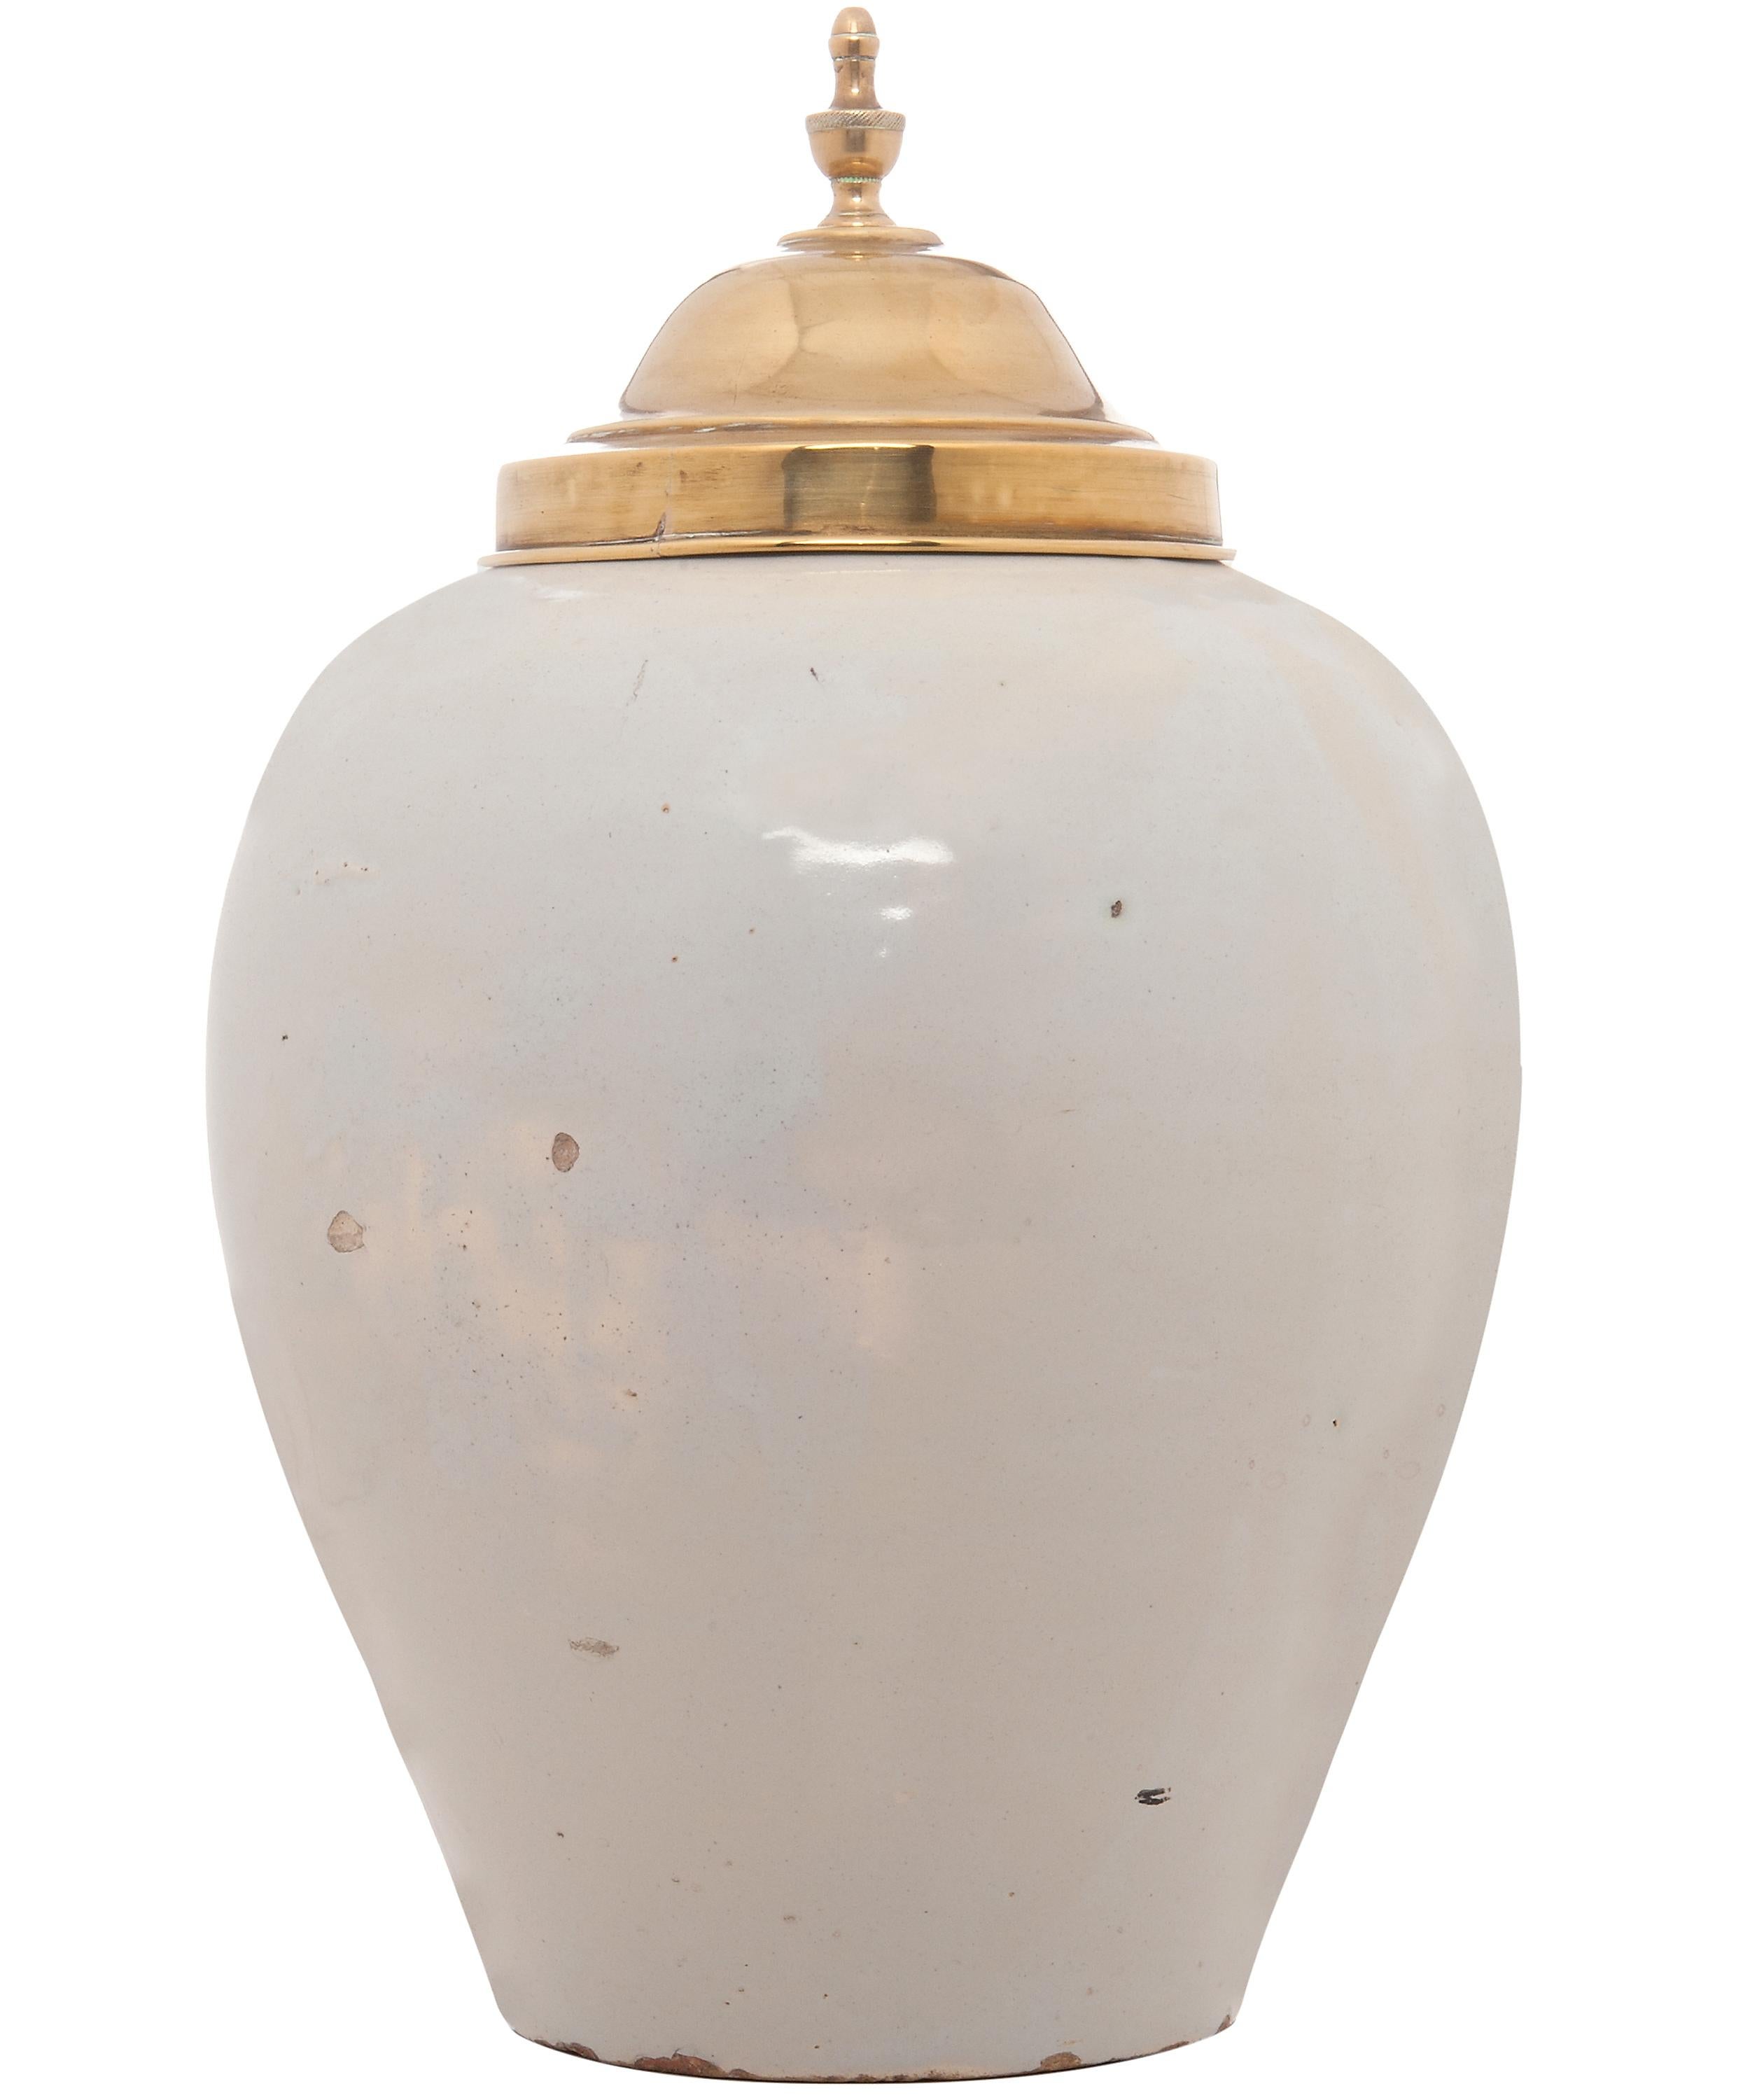 An ovoid vase body with a statue of Mercury in the middle of merchandise against a background of sea and ships. Inscriptions: 'De Hoop', 'Sigaren', 'Rappé' and 'No 7'.
Measurement with lid: 36cm. (14.20